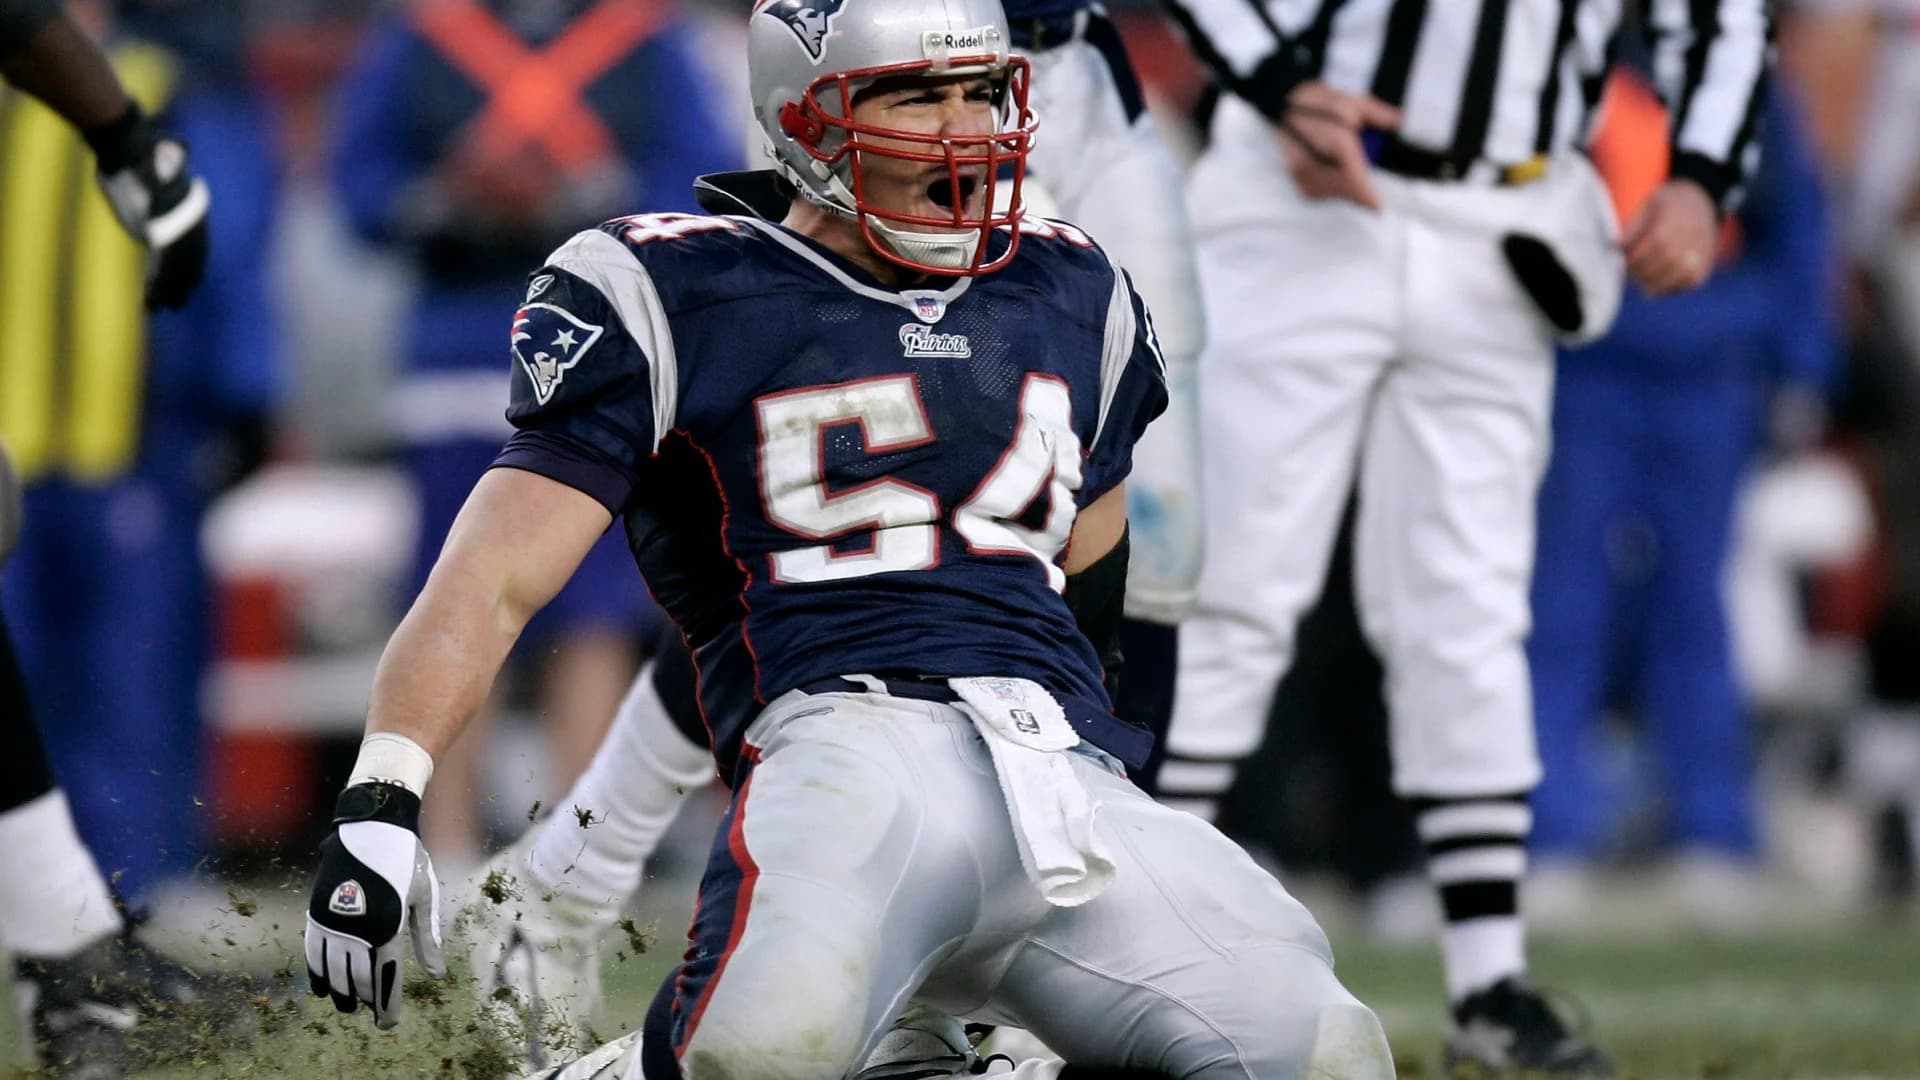 Ex-Patriot, ESPN analyst Tedy Bruschi recovering after 2nd stroke